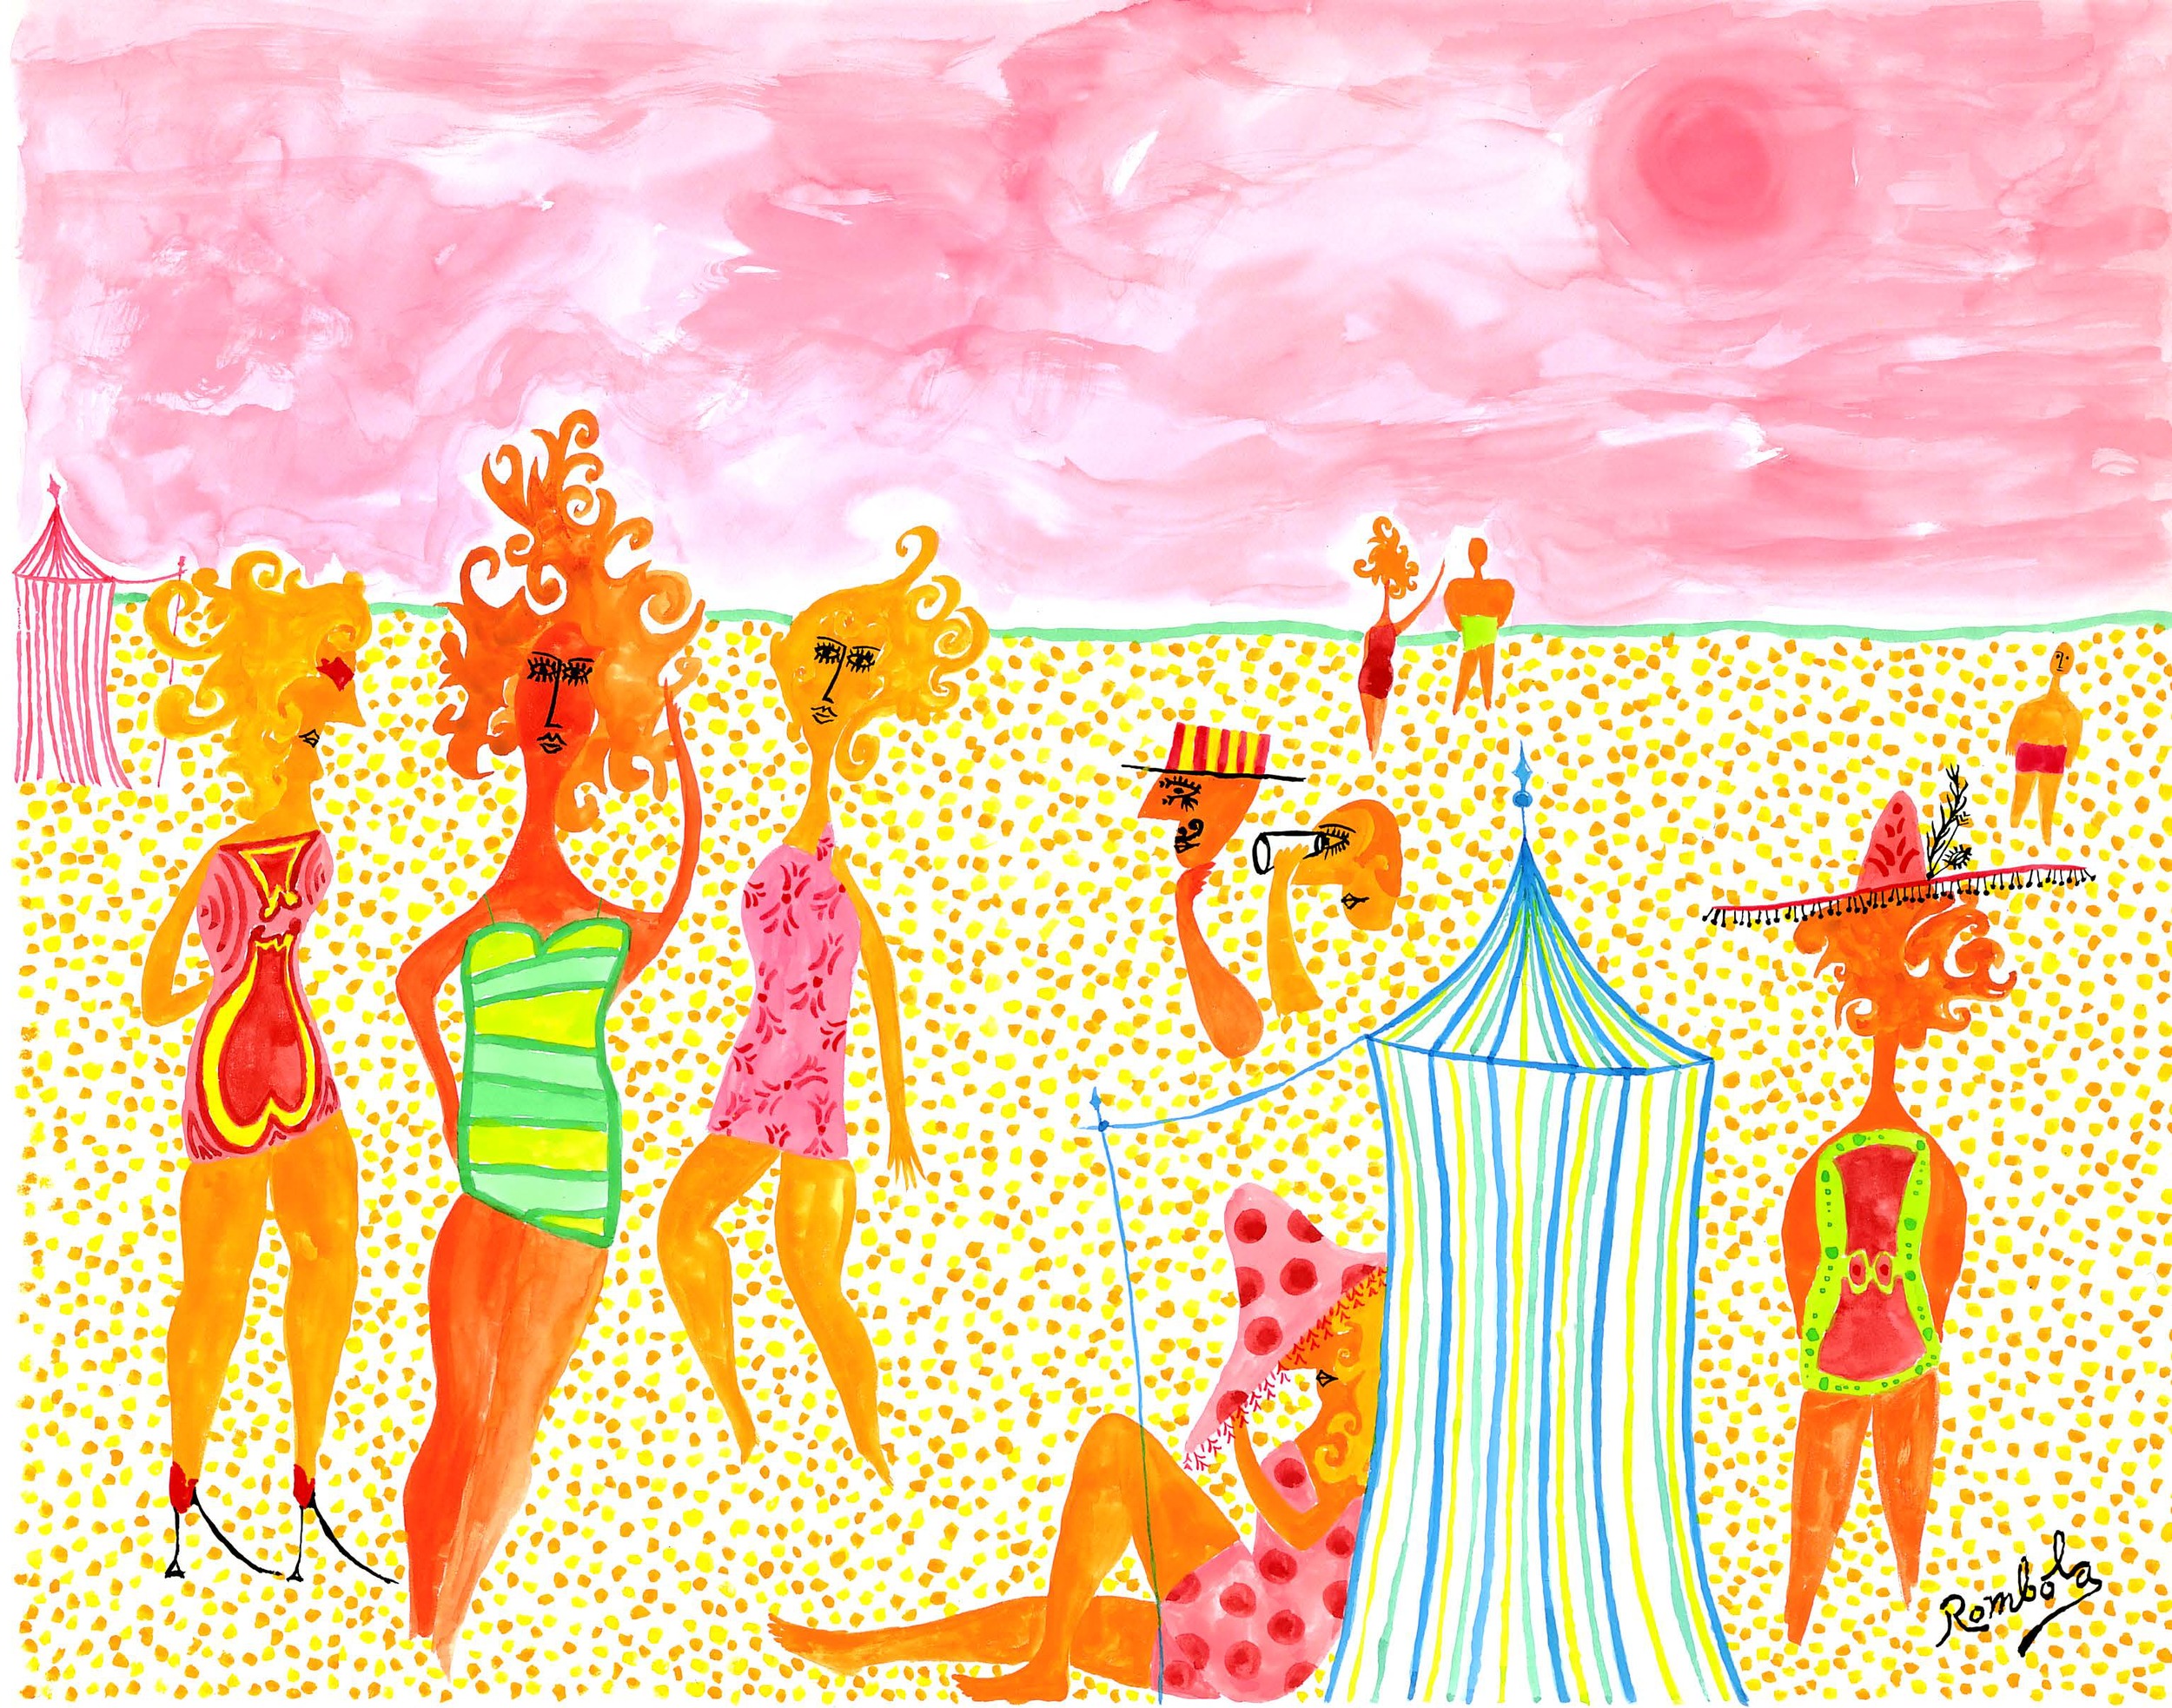   The Crowded Beach    Gouache on paper 1960   